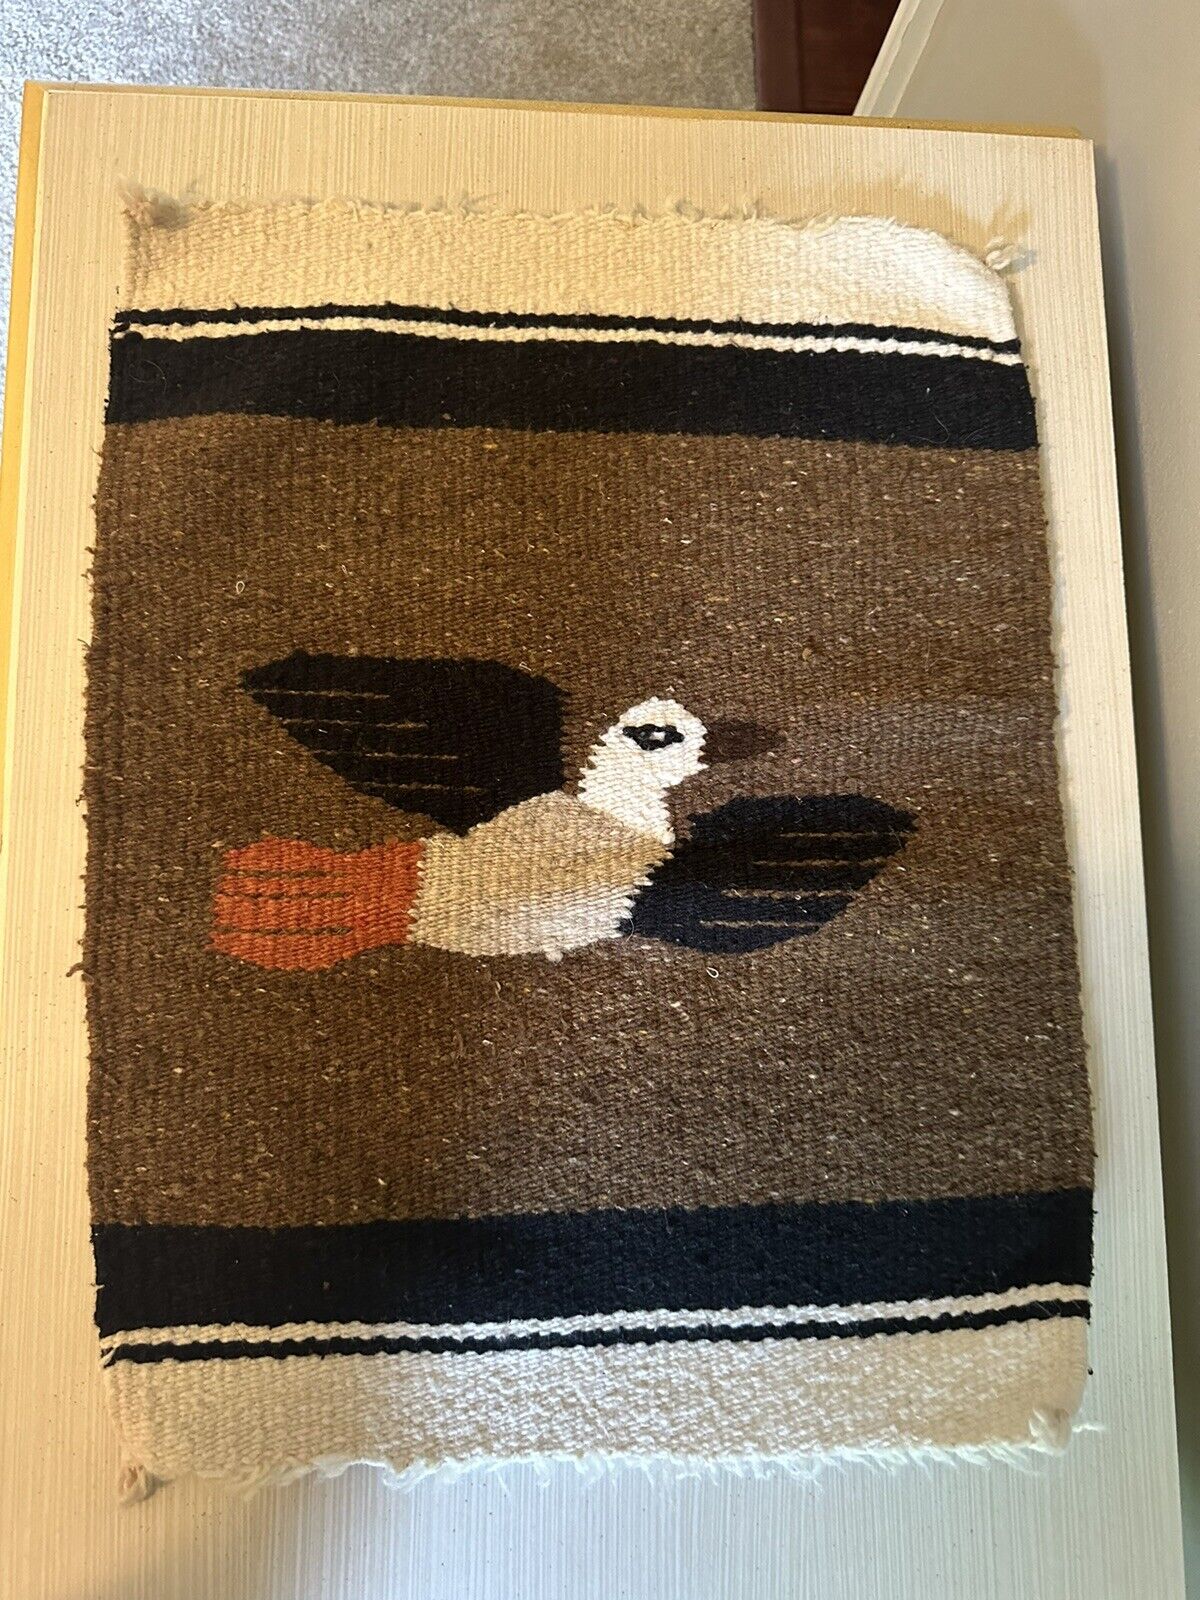 Vintage Southwestern or Mexican Textile Small Rug Wall Tapestry w/ Bird 1